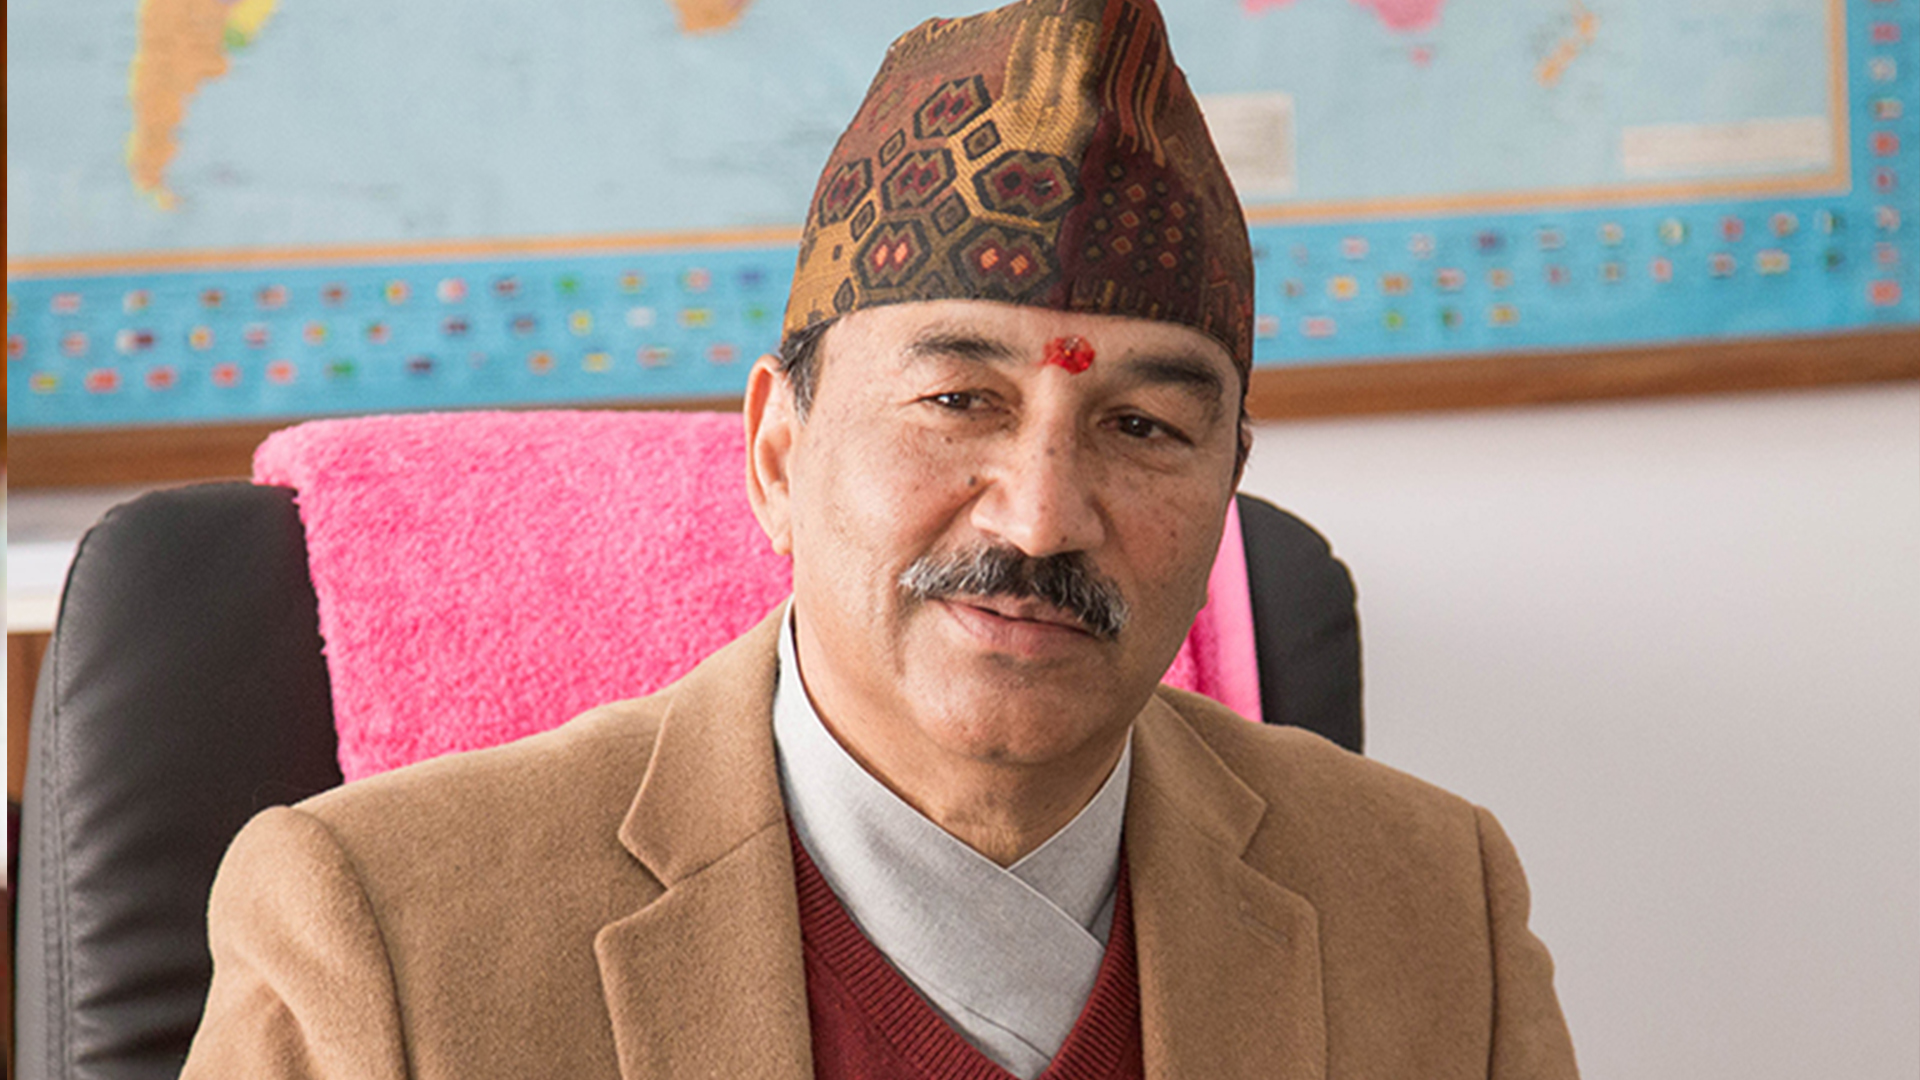 RPP Chairman Kamal Thapa has said that he will take initiative to pay the remaining payment of sugarcane farmers